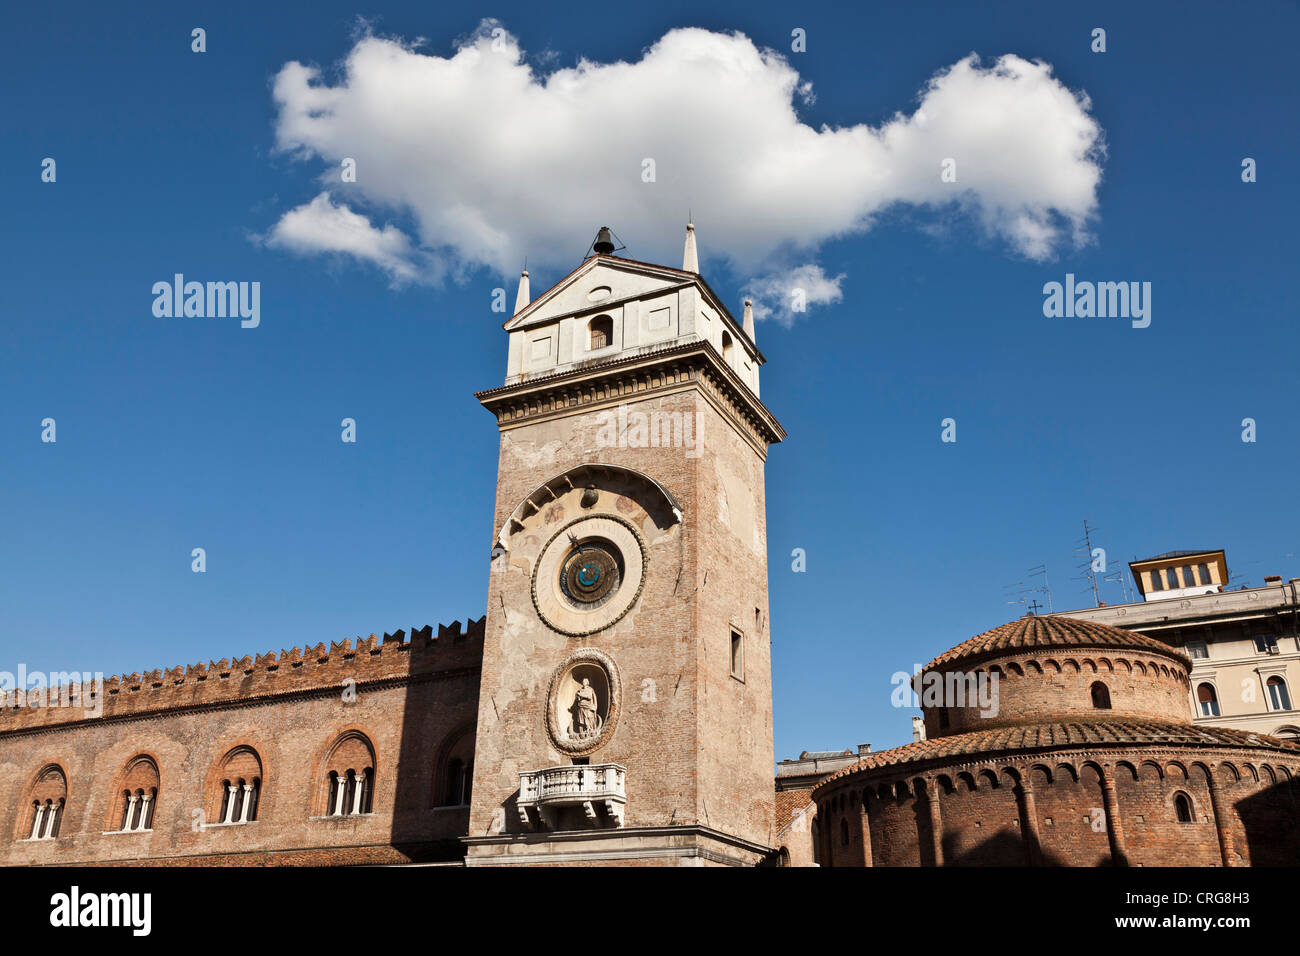 Ornate clock tower in town square Stock Photo